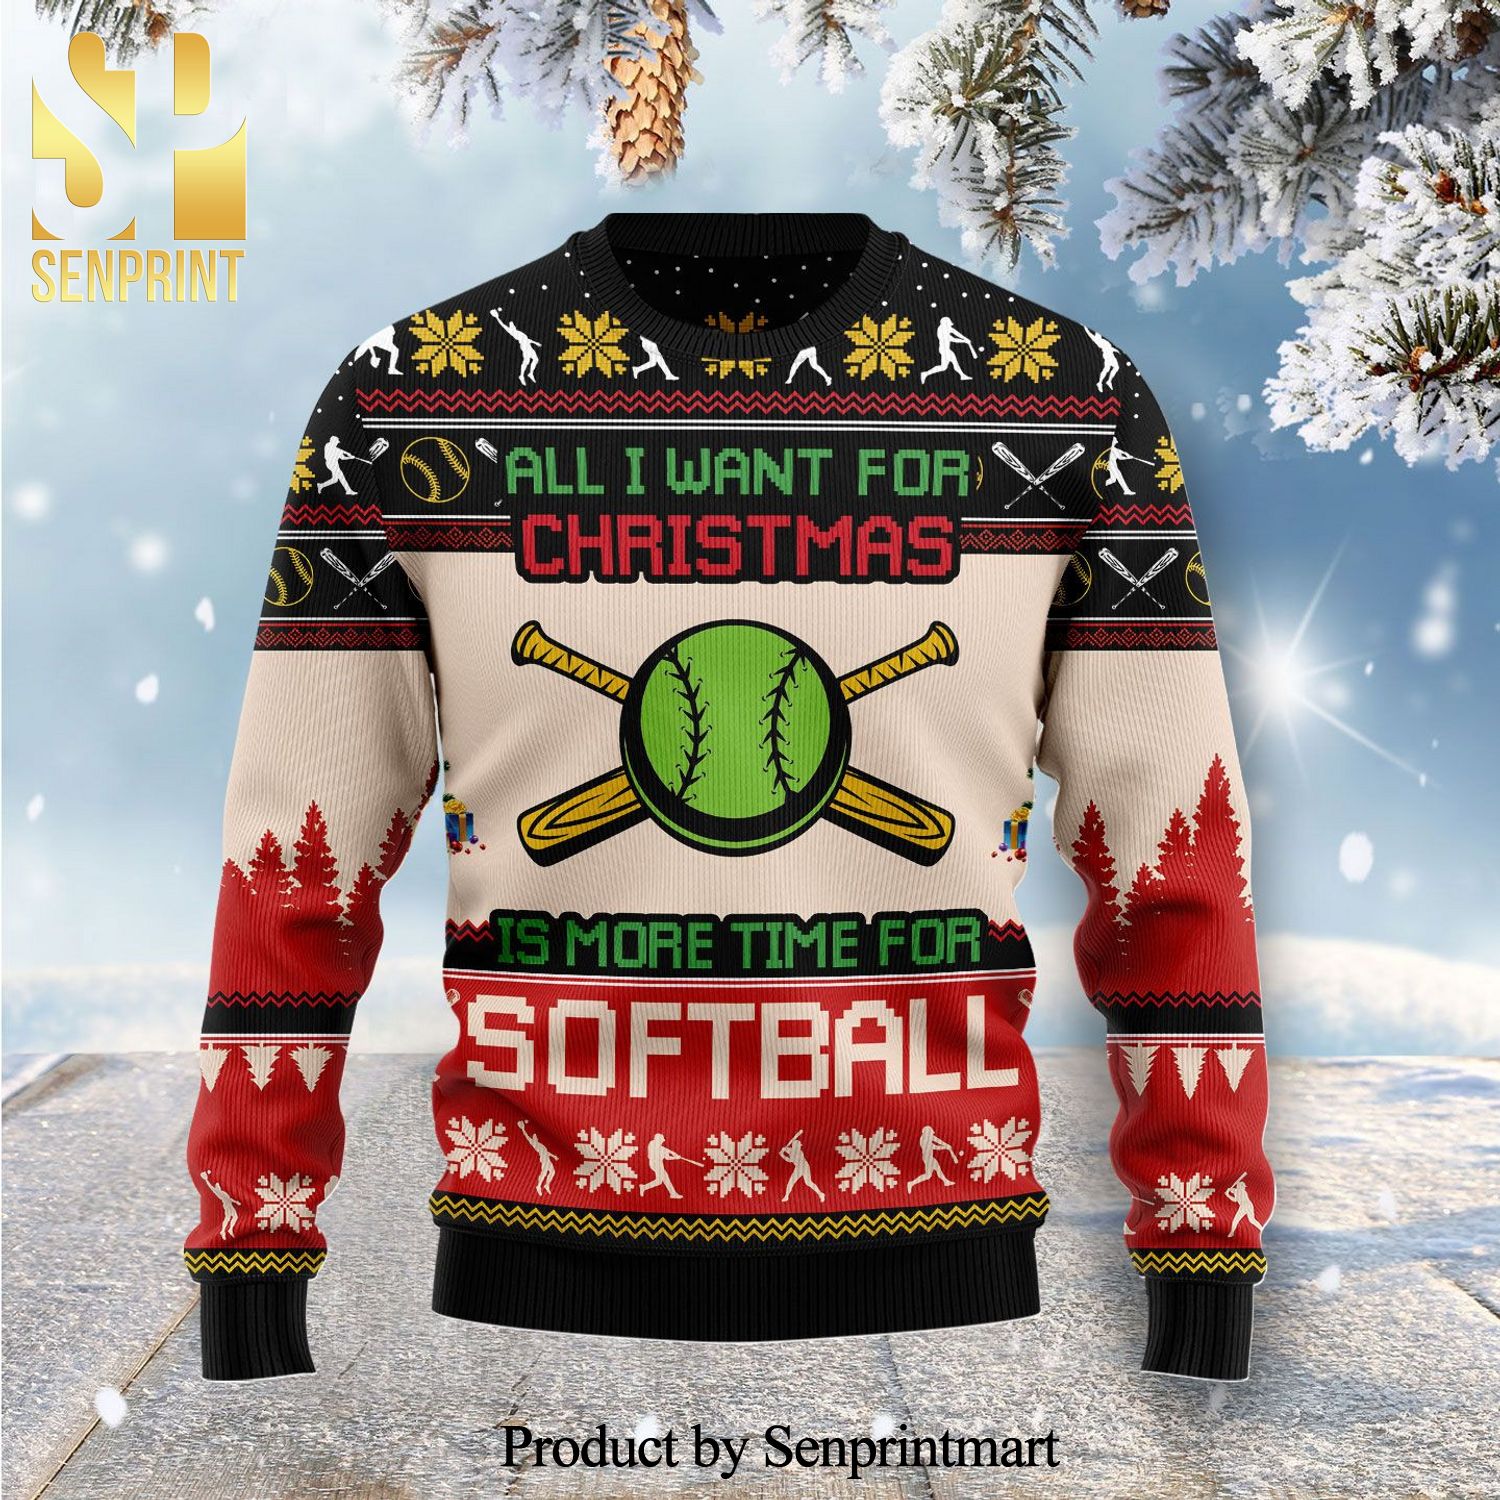 All I Want For Christmas Is More Time For Softball Knitted Ugly Christmas Sweater